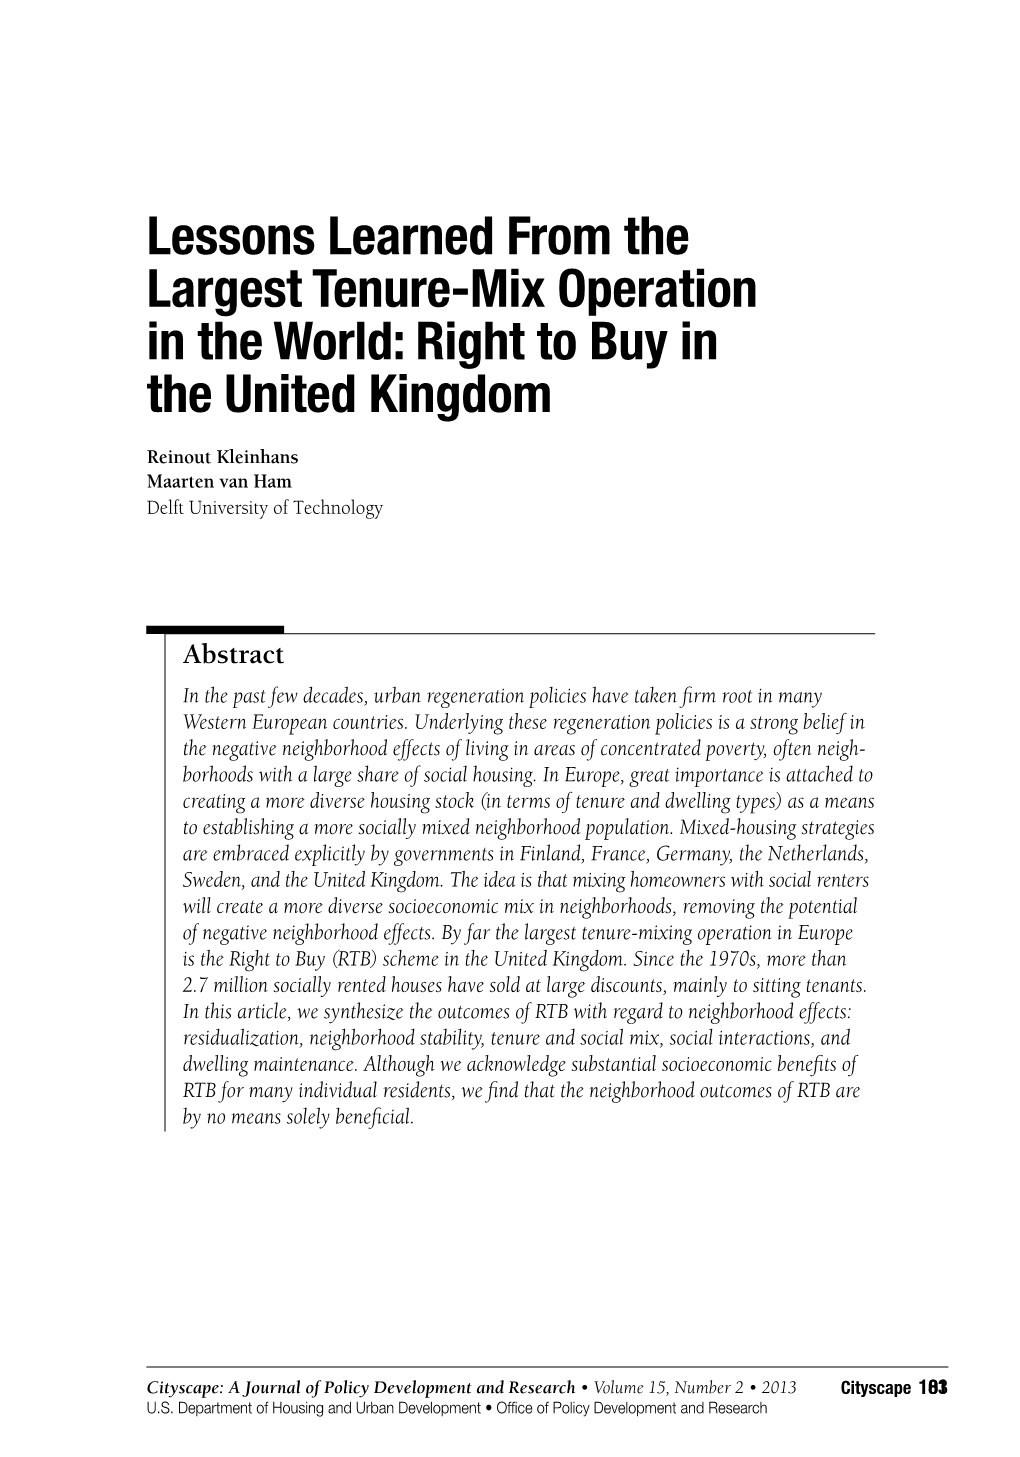 Lessons Learned from the Largest Tenure-Mix Operation in the World: Right to Buy in the United Kingdom